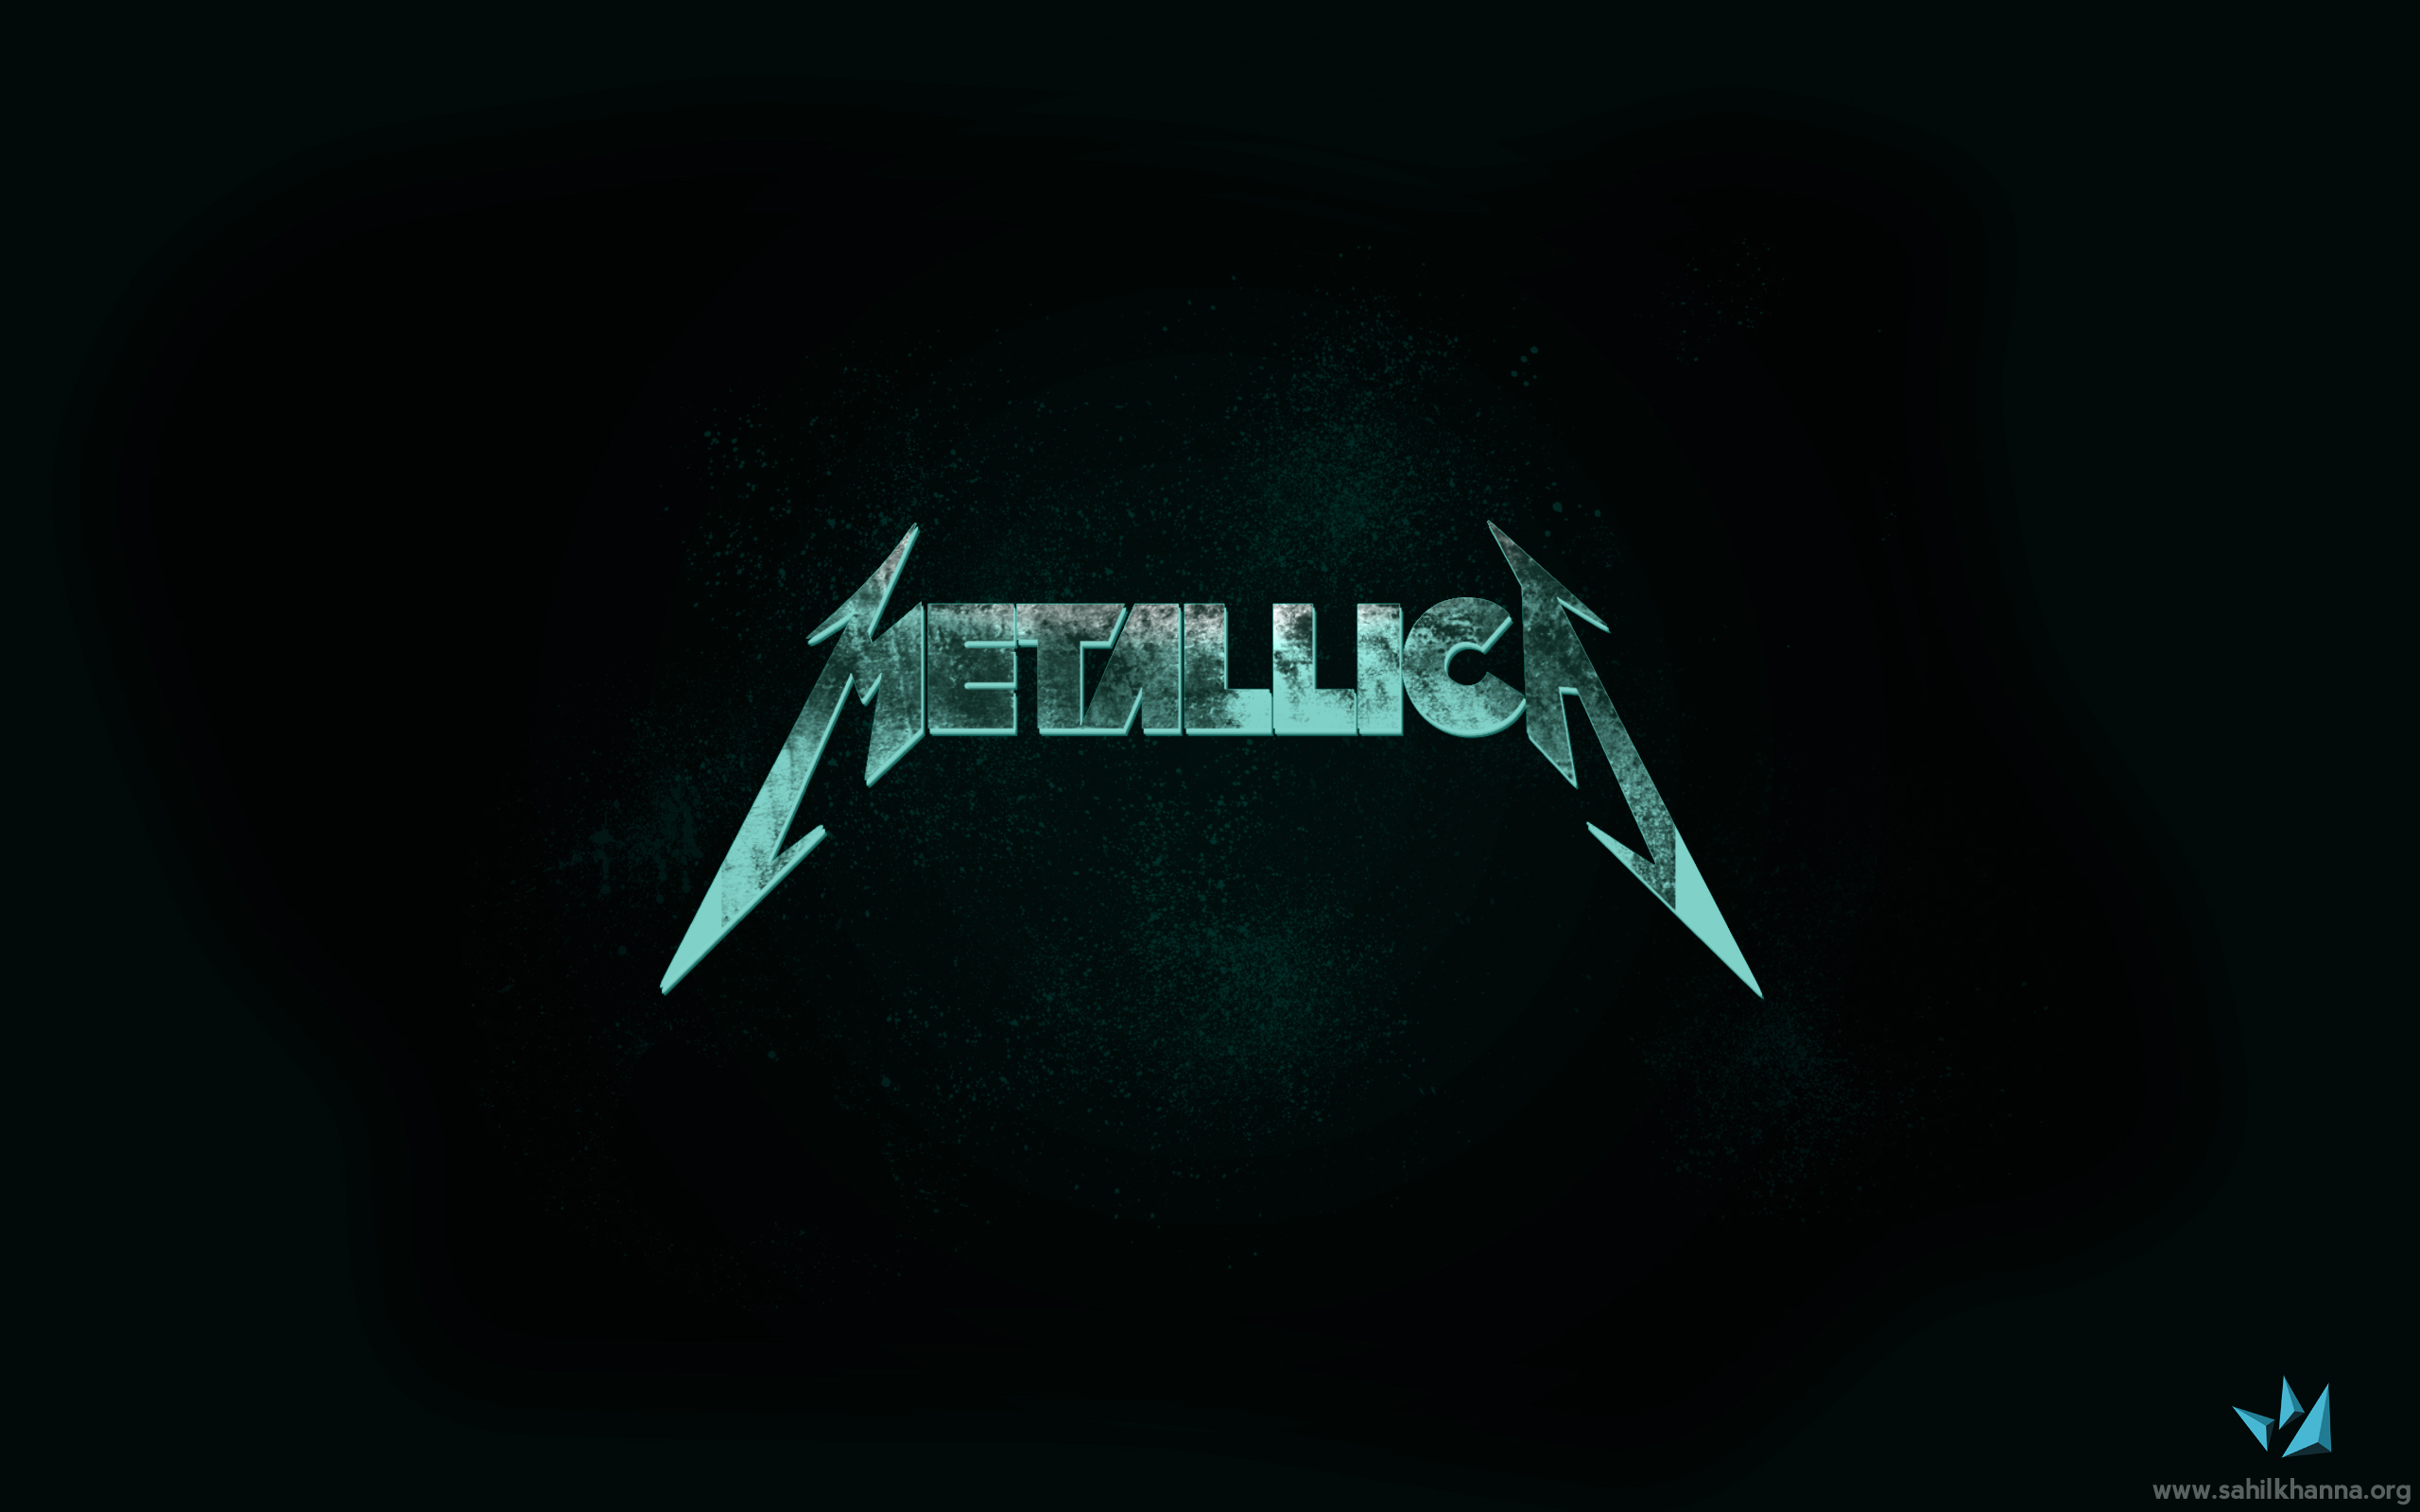 Metallica Wallpaper Cover Photo Pack Update With